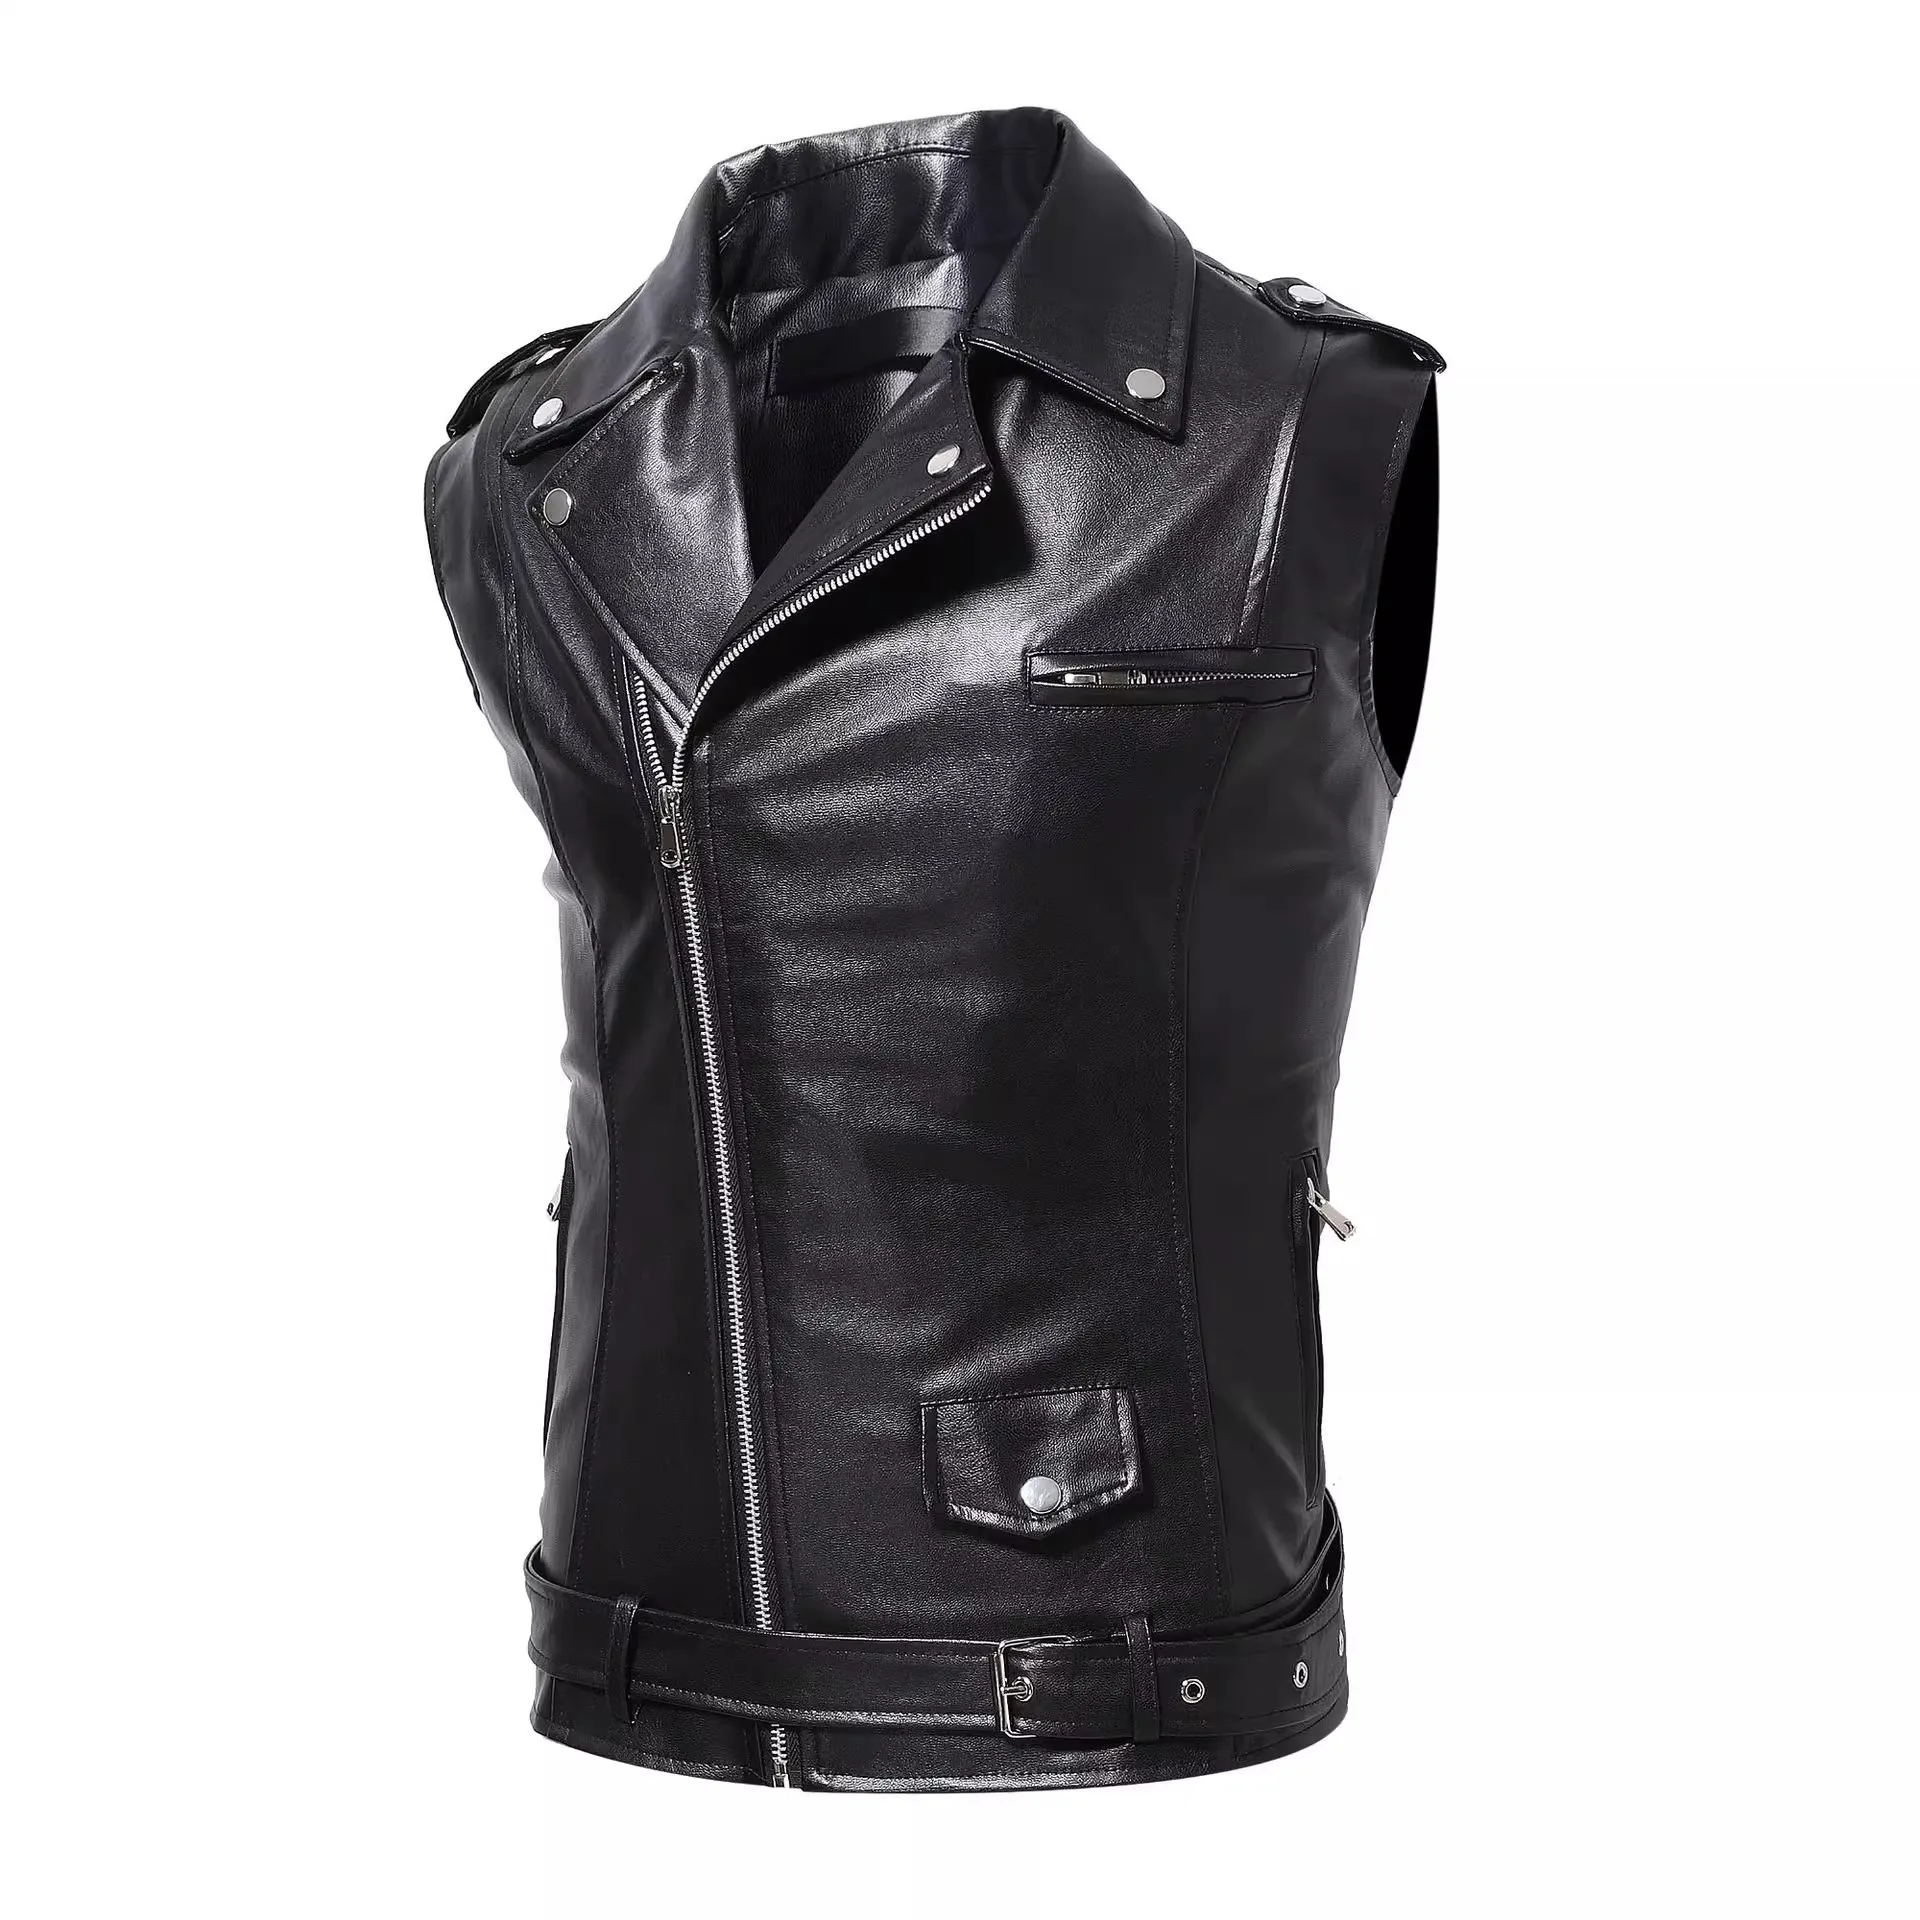 Leather Vest Jacket Men Fashion Slim Fit Short Motorcycle Sleeveless Waistcoat Zipper Biker PU Black Faux Leather Jacket Male covrlge men s vest color woven jacquard casual thickened wool undershirt autumn knitted shoulder sleeveless sweater male mzb017